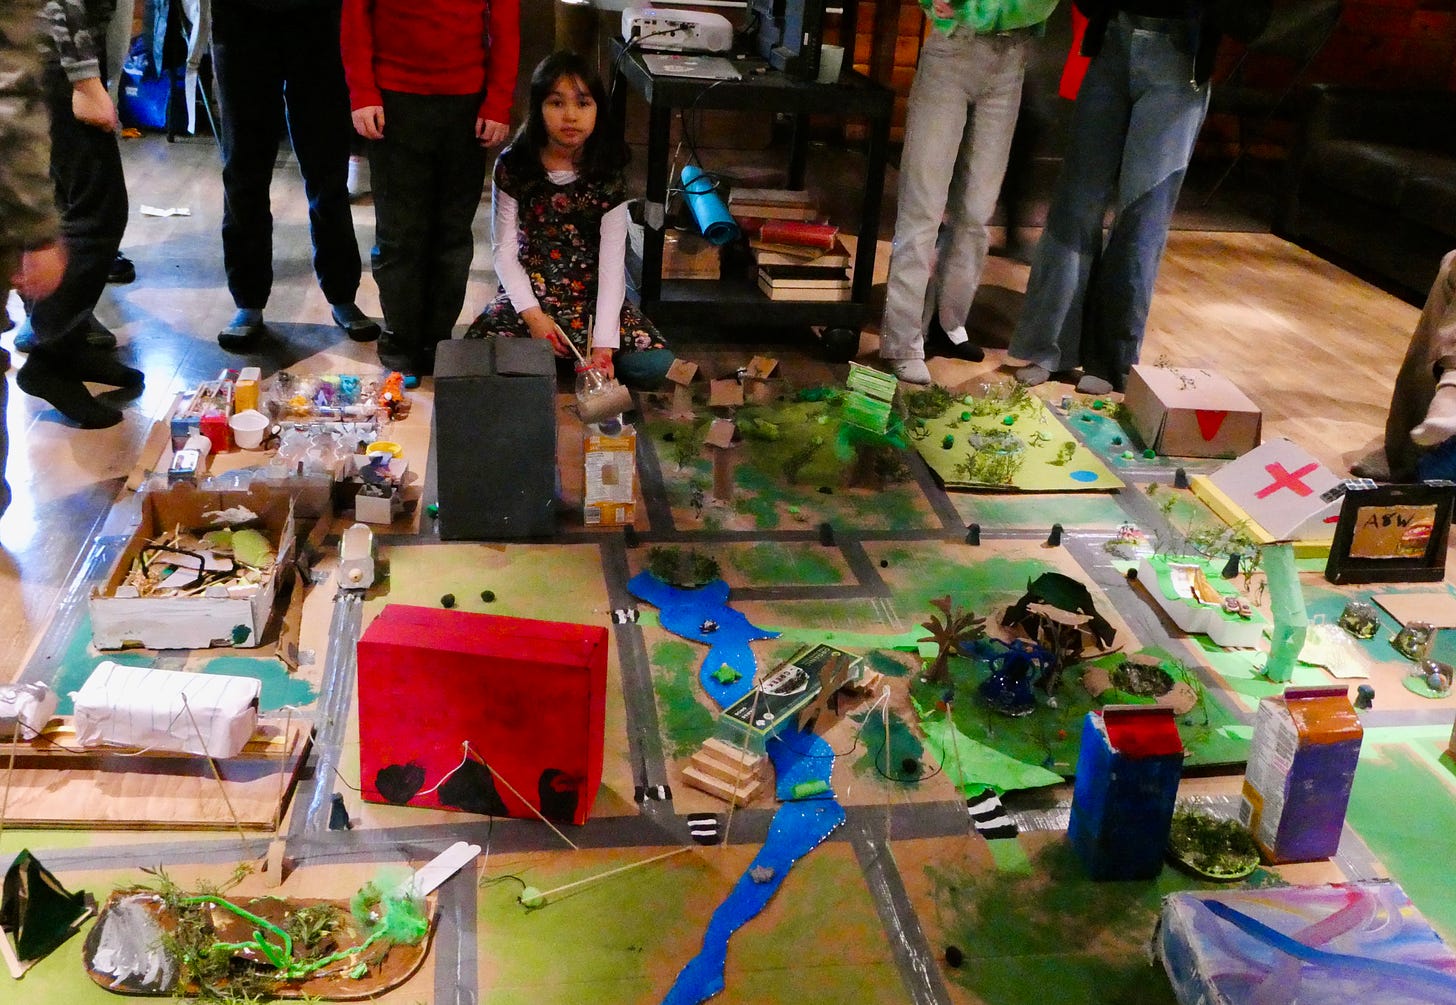 girl sitting next to large diorama made from recycled materials